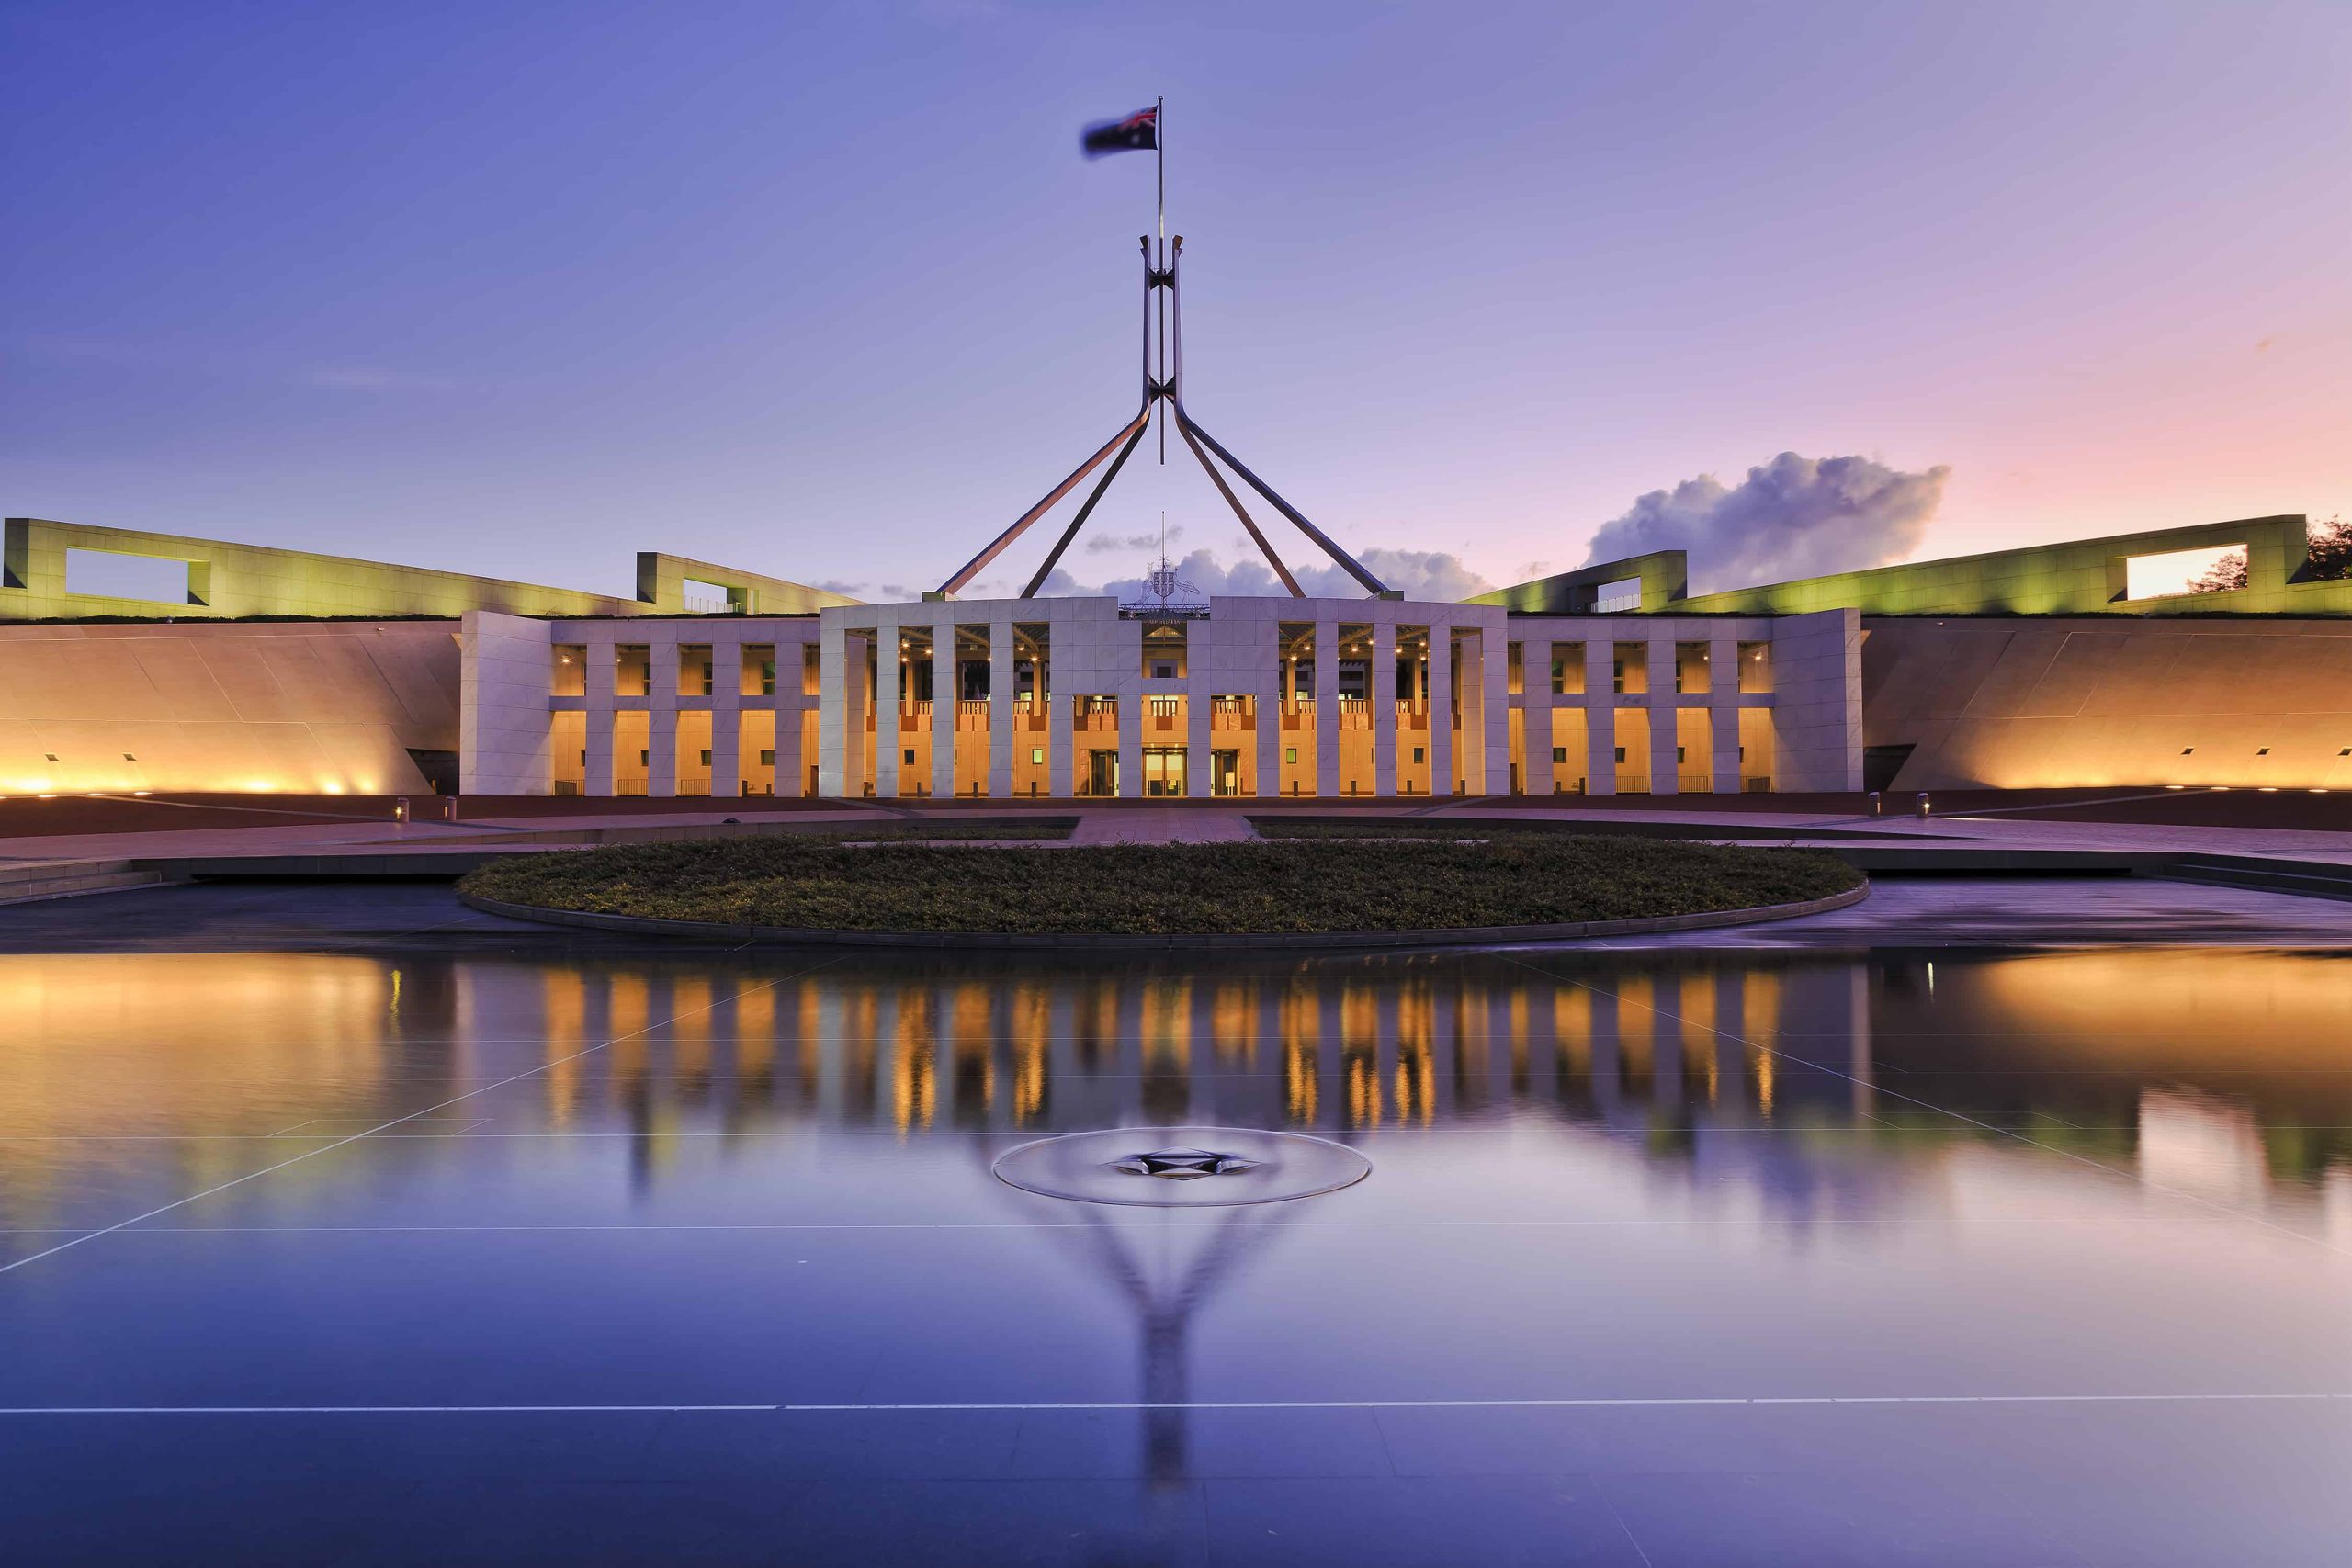 Colourful reflection of Canberra's new parliament building in a fountain pond at sunset.